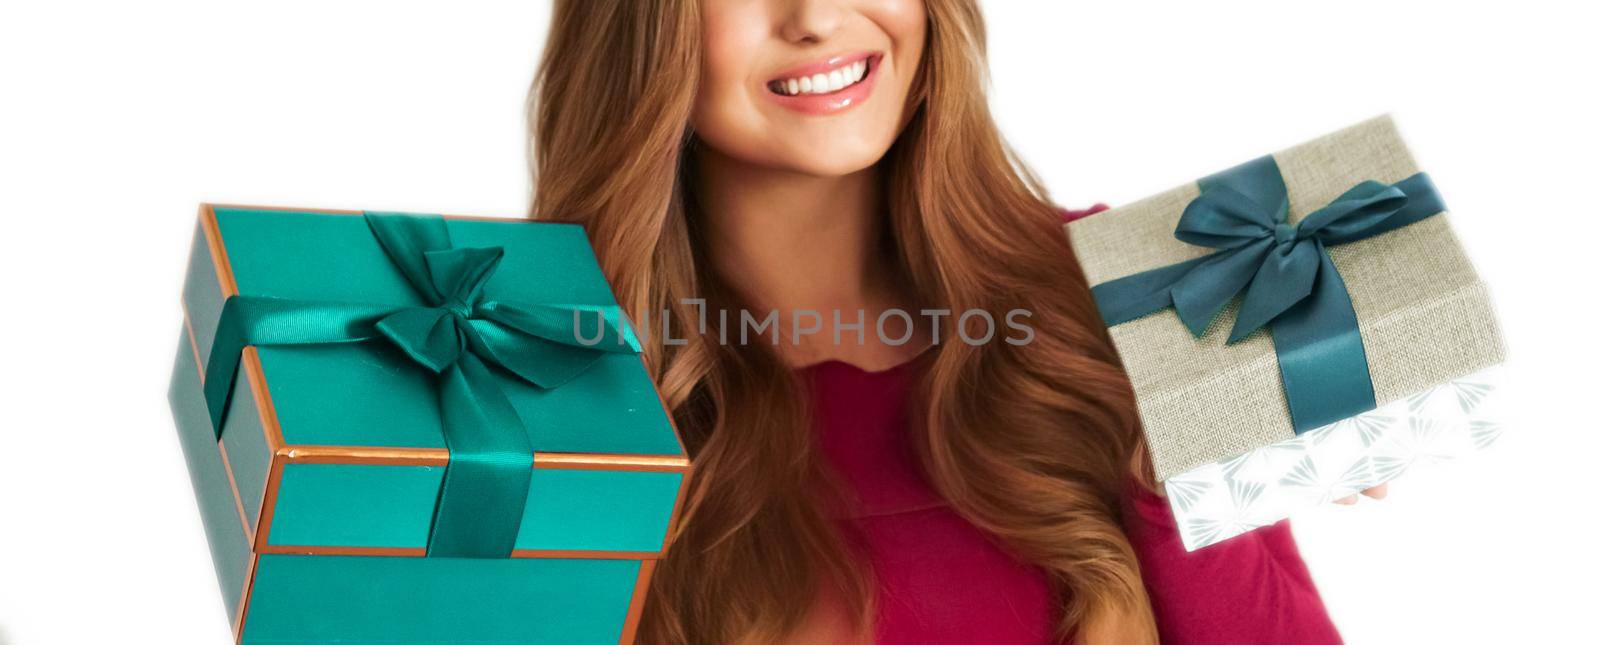 Birthday, Christmas gifts or holiday present, happy woman holding gift boxes isolated on white background, portrait